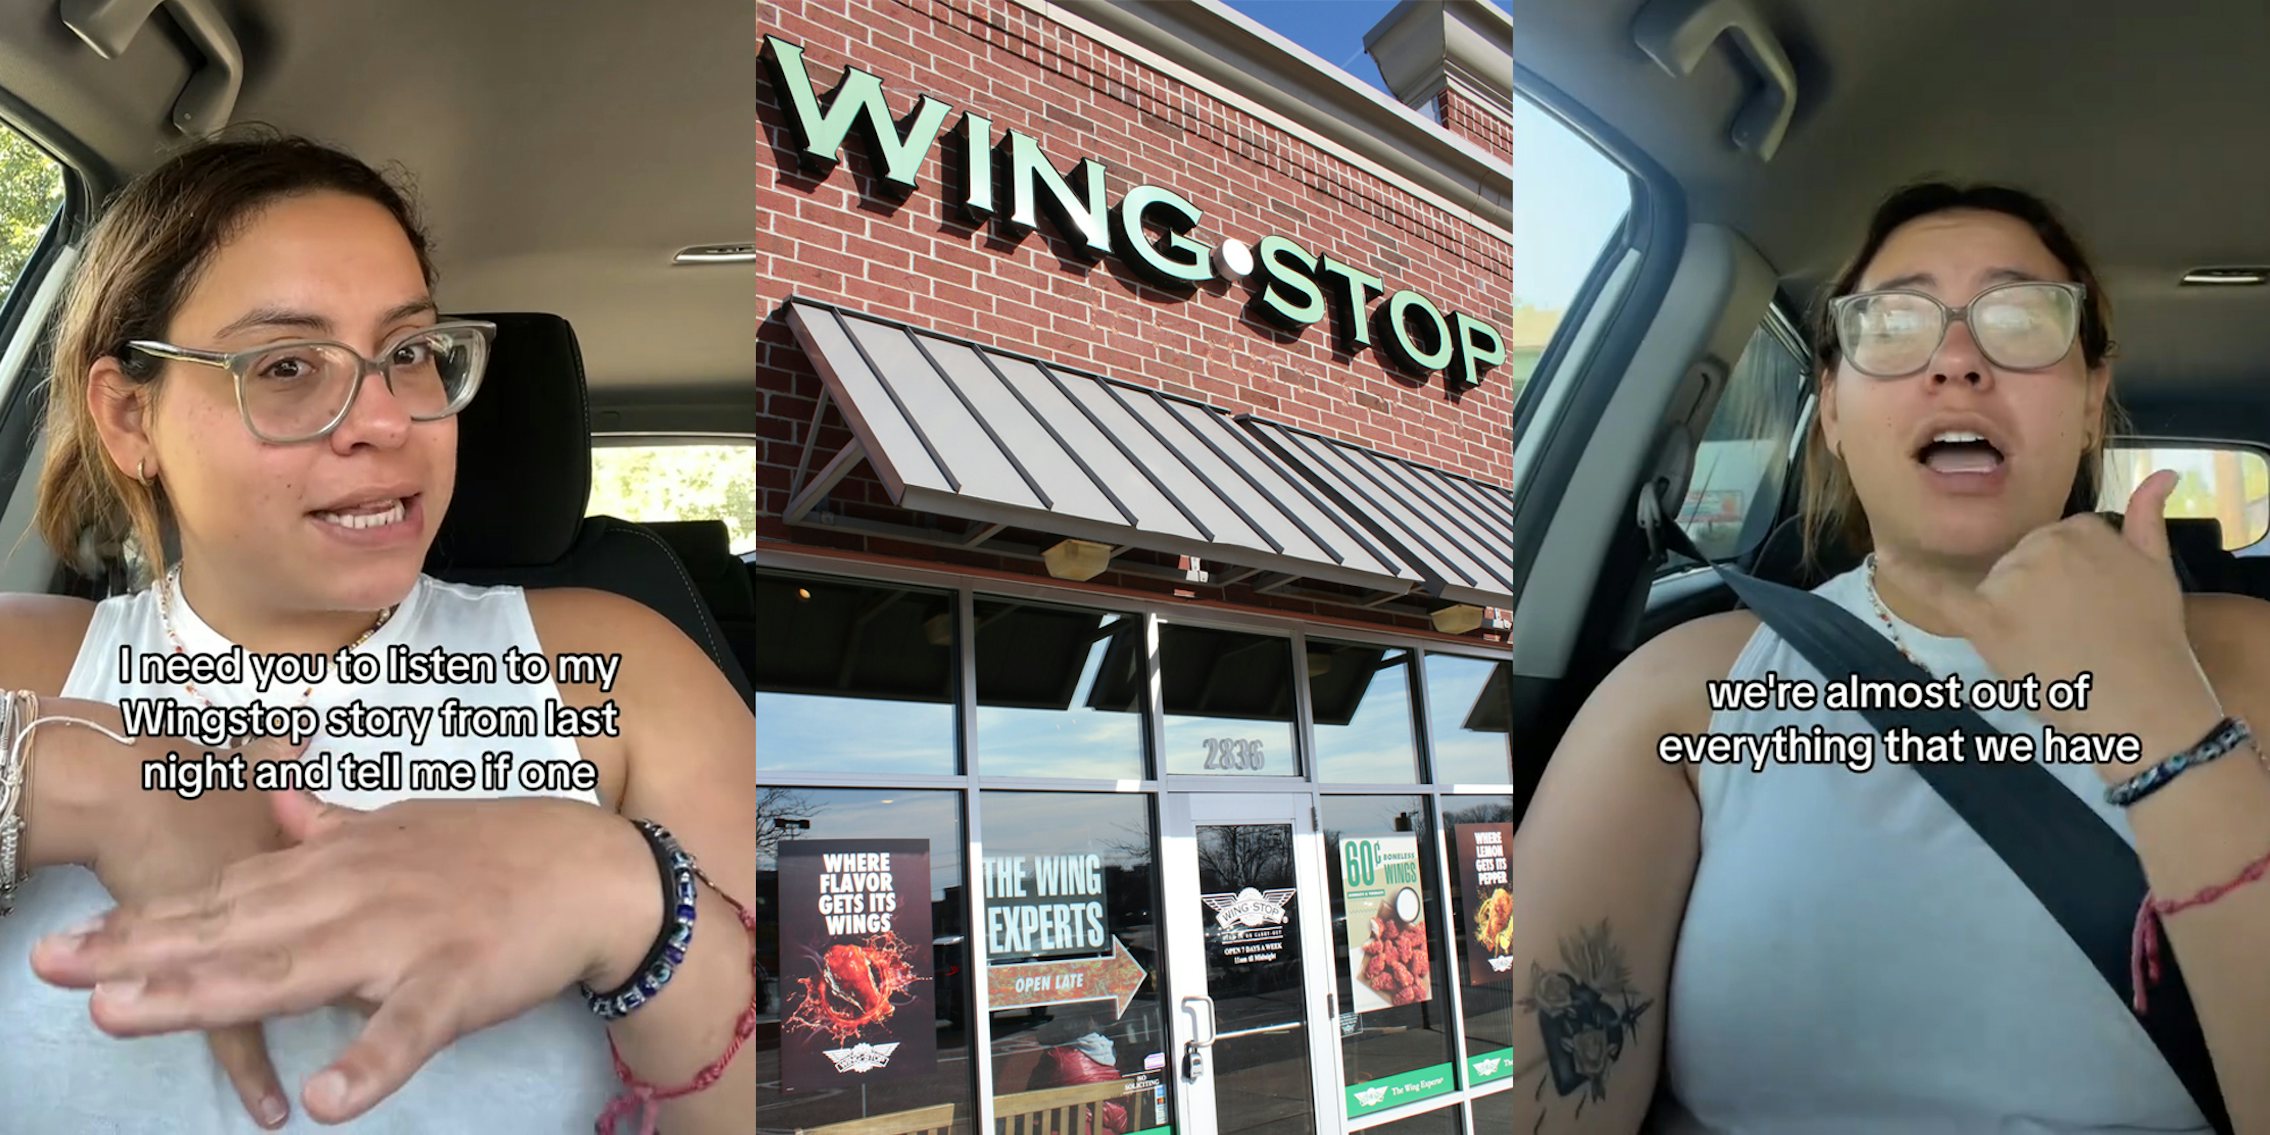 Wing Stop customer speaking in car with caption 'I need you to listen to my Wingstop story from last night and tell me if one' (l) Wing Stop sign on building (c) https://www.instagram.com/caterinaroseart/we're almost out of everything that we have' (r)